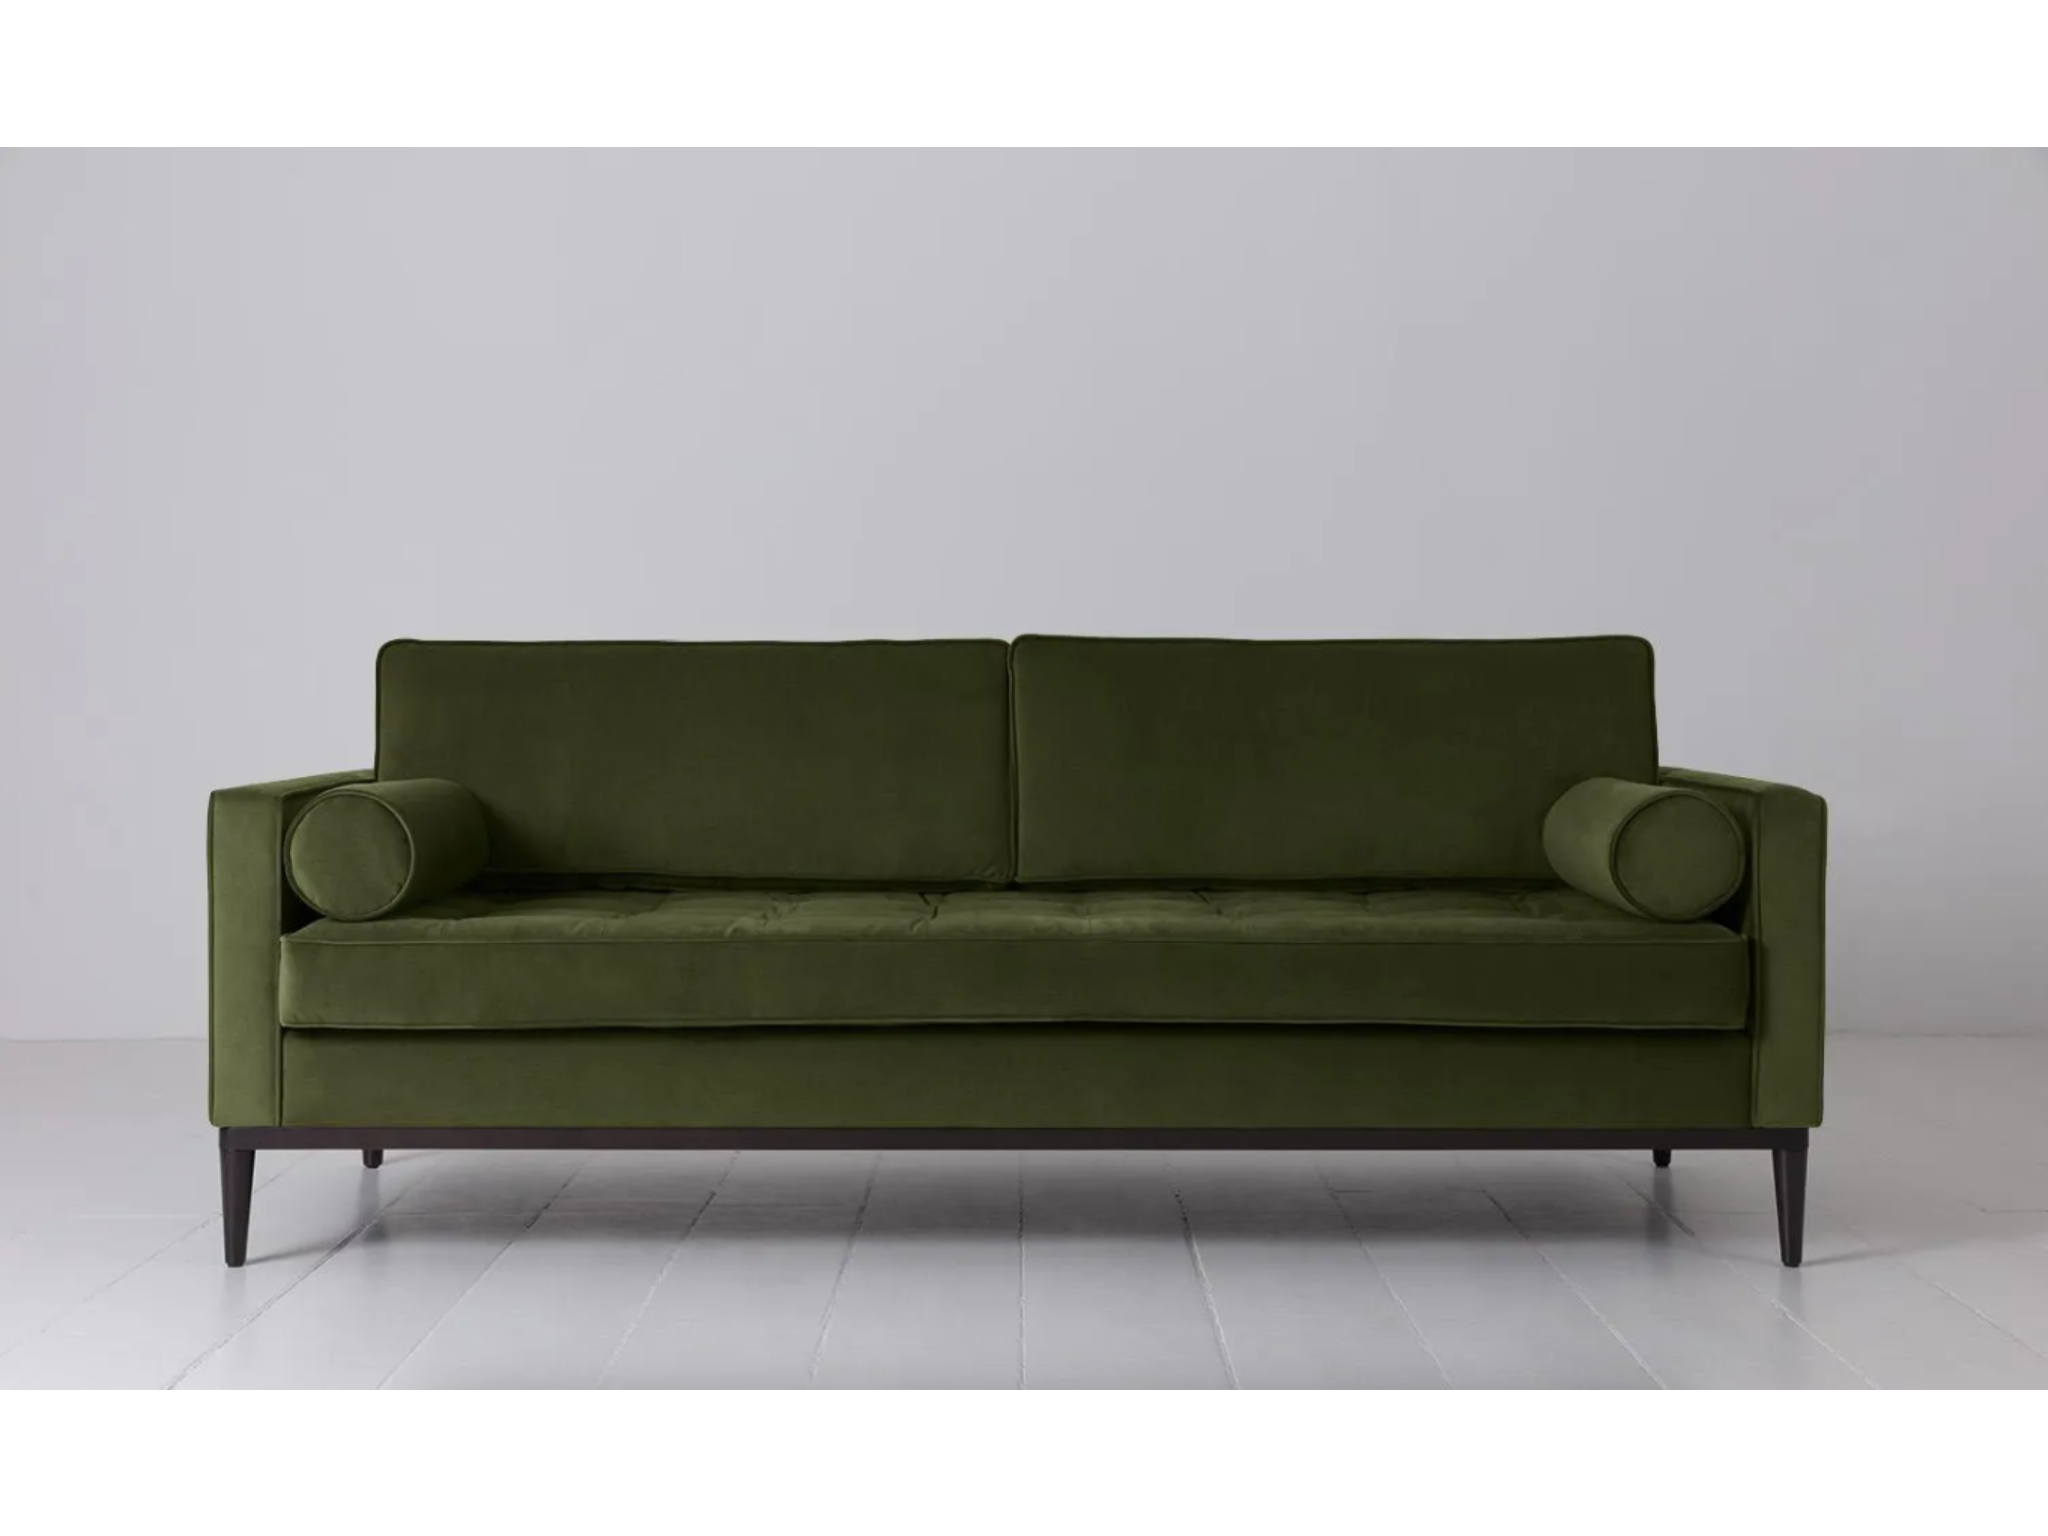 Swyft-sofa-bed-indybest